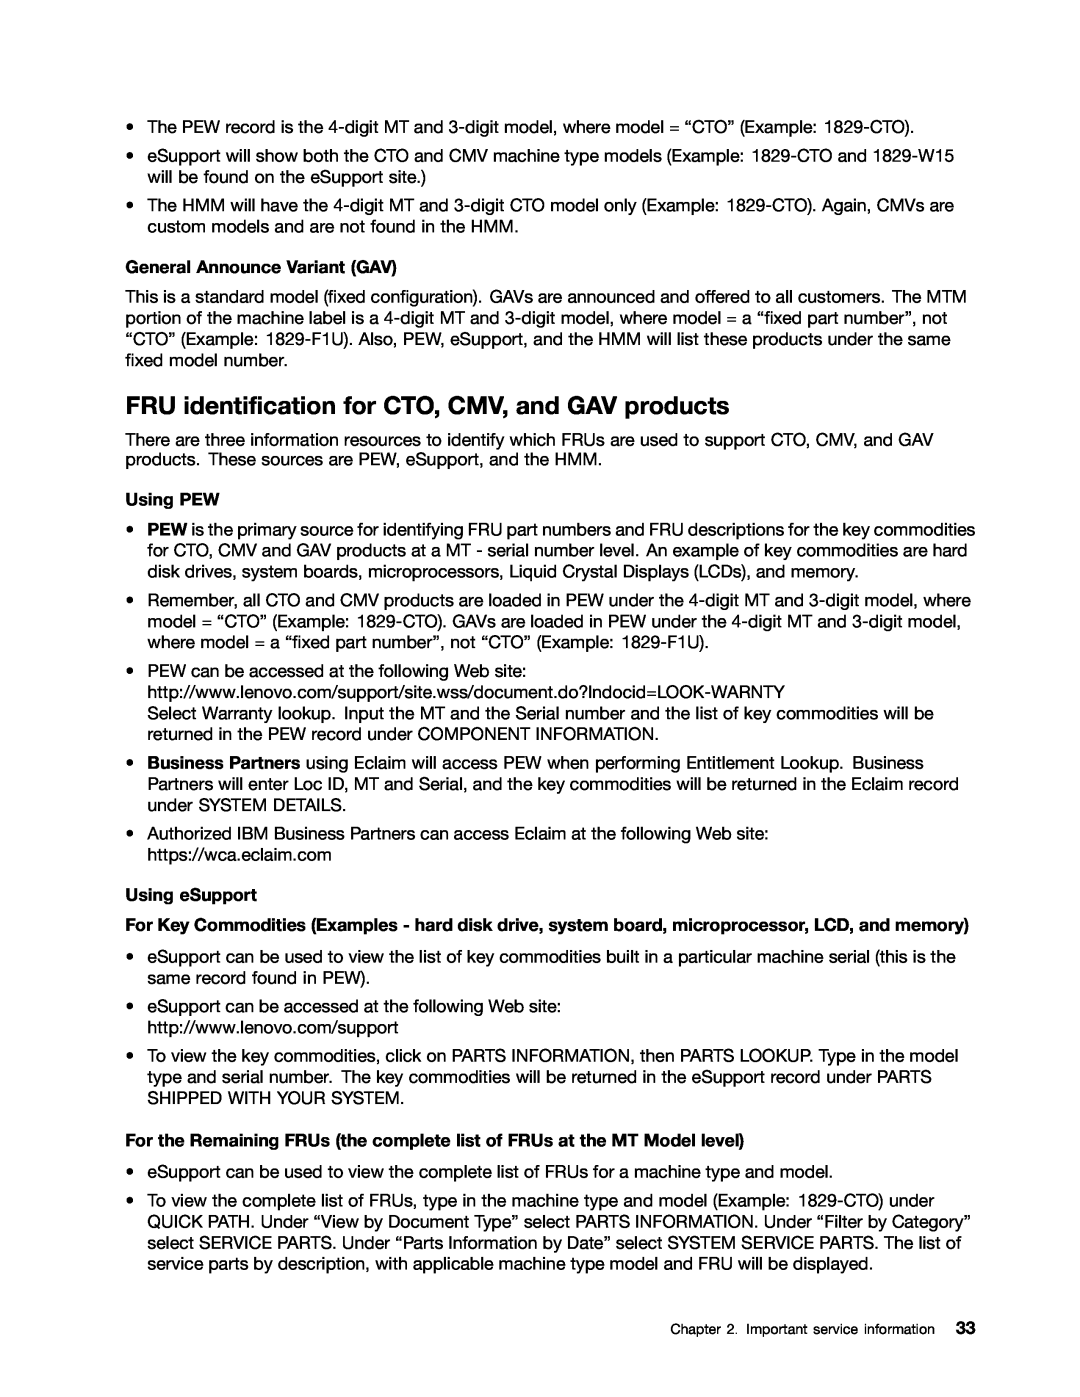 IBM T400S manual FRU identification for CTO, CMV, and GAV products, General Announce Variant GAV, Using PEW, Using eSupport 